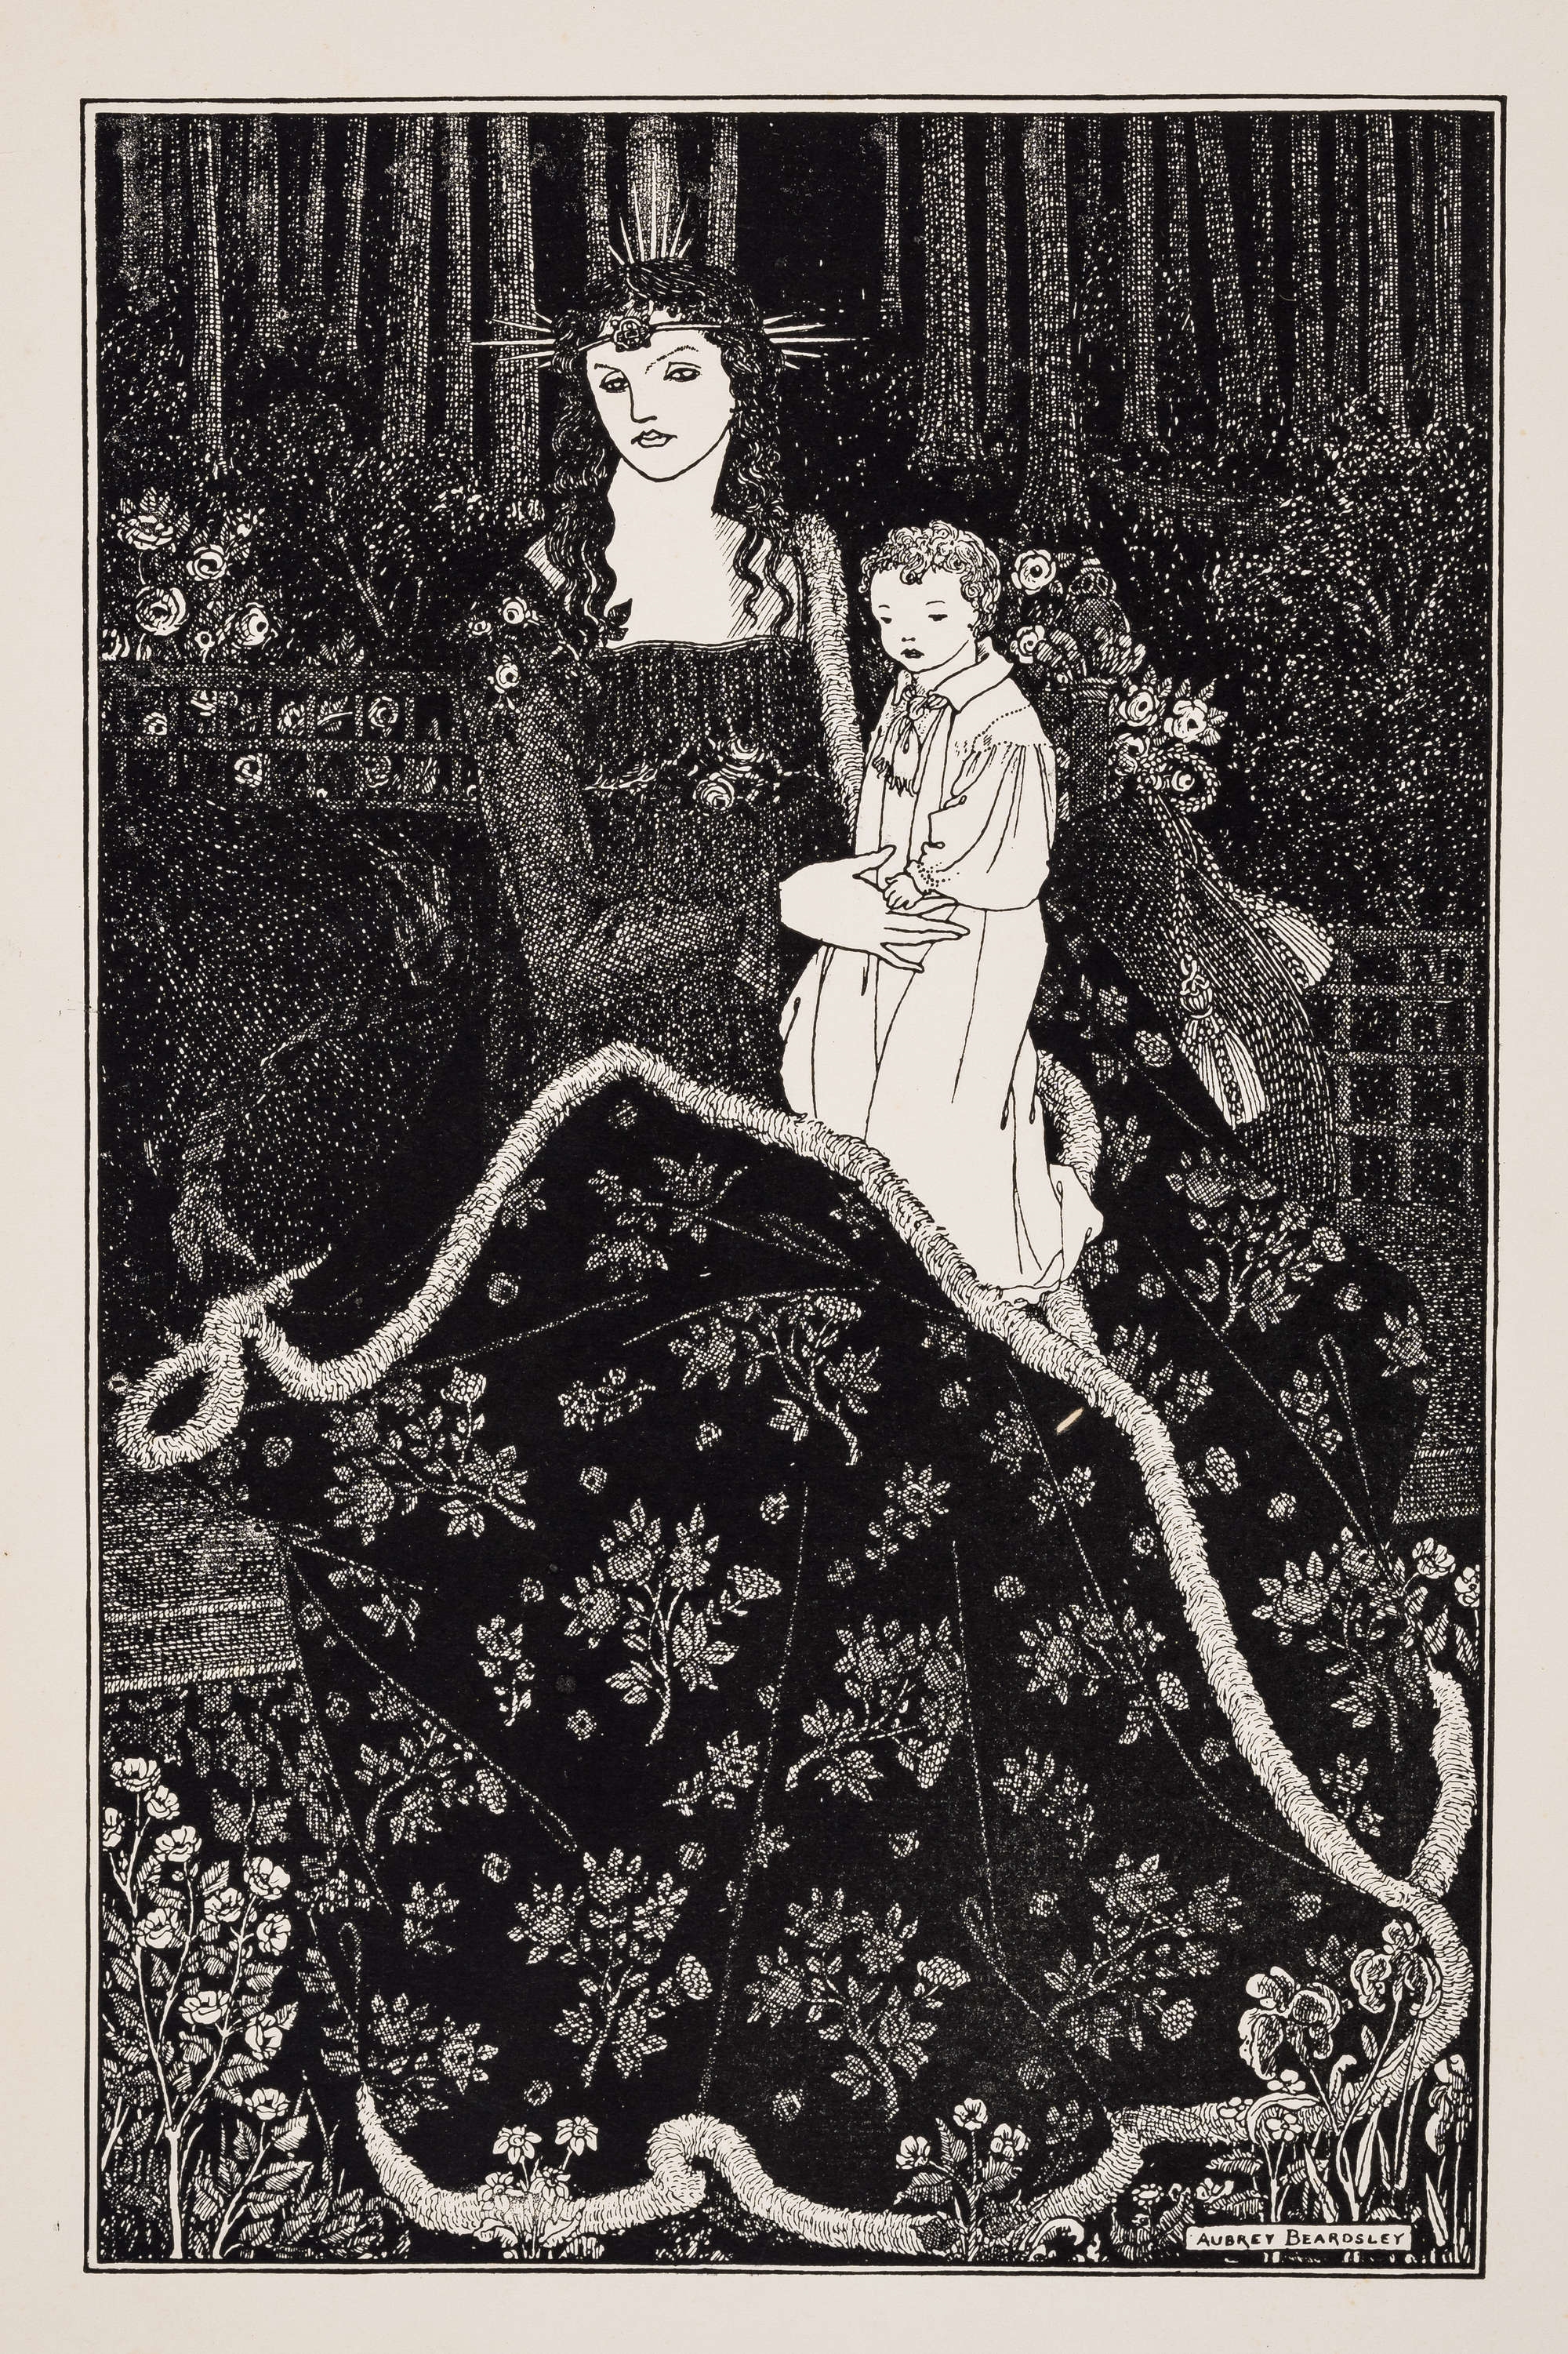 Artwork by Aubrey Beardsley, A Book of Fifty Drawings, Made of red cloth, gilt